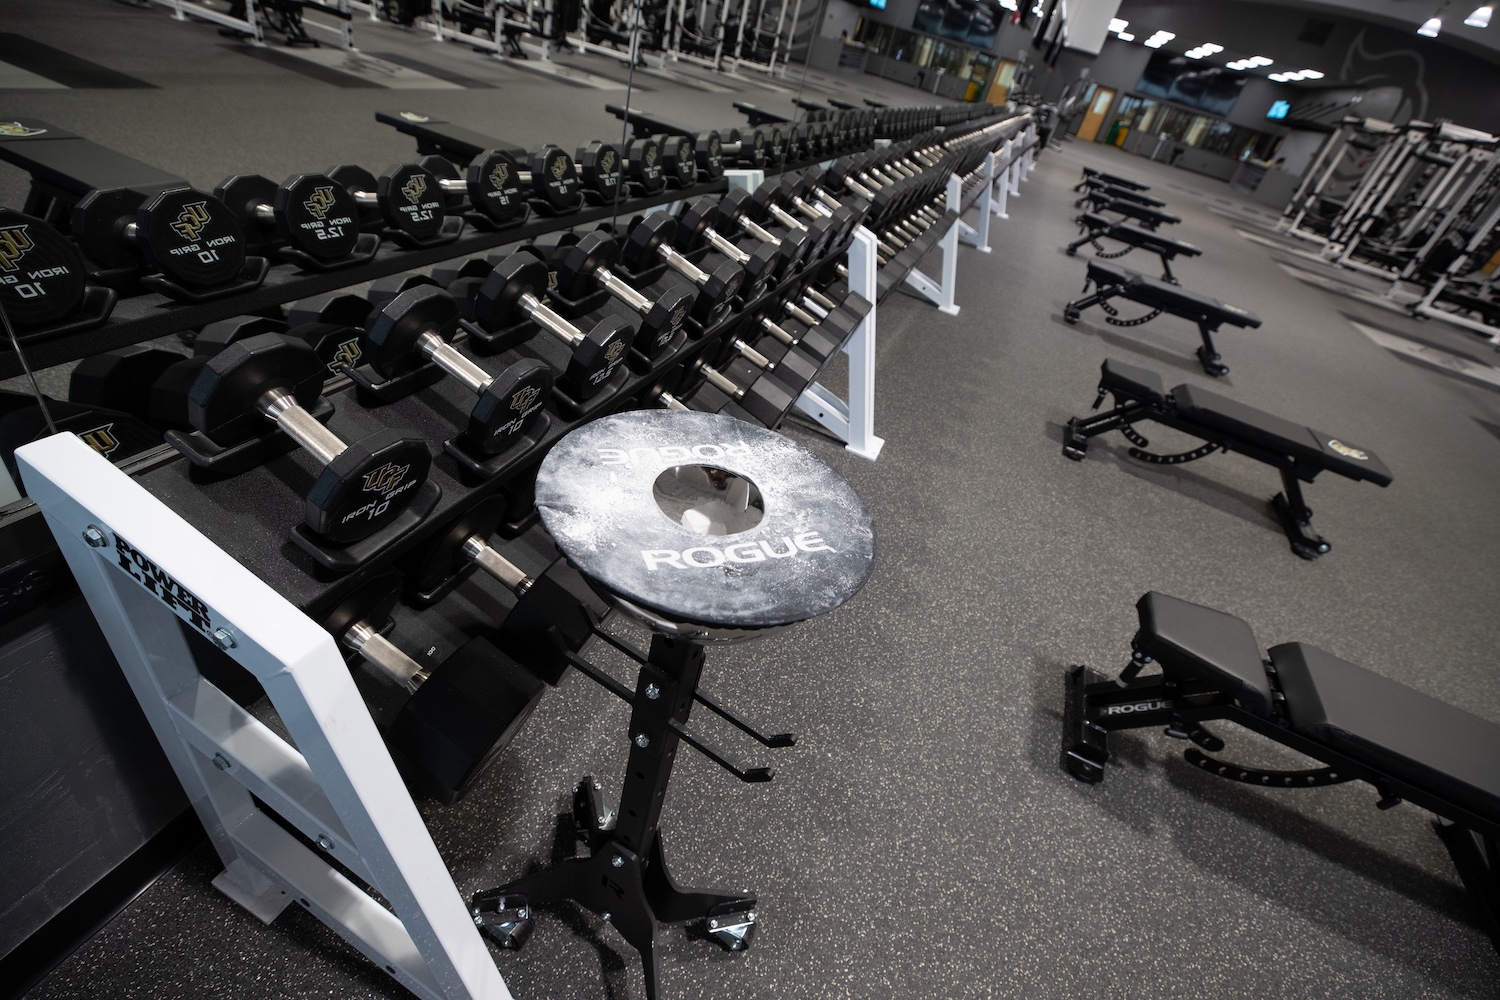 University of Central Florida Custom Gym – Gallery | The Index